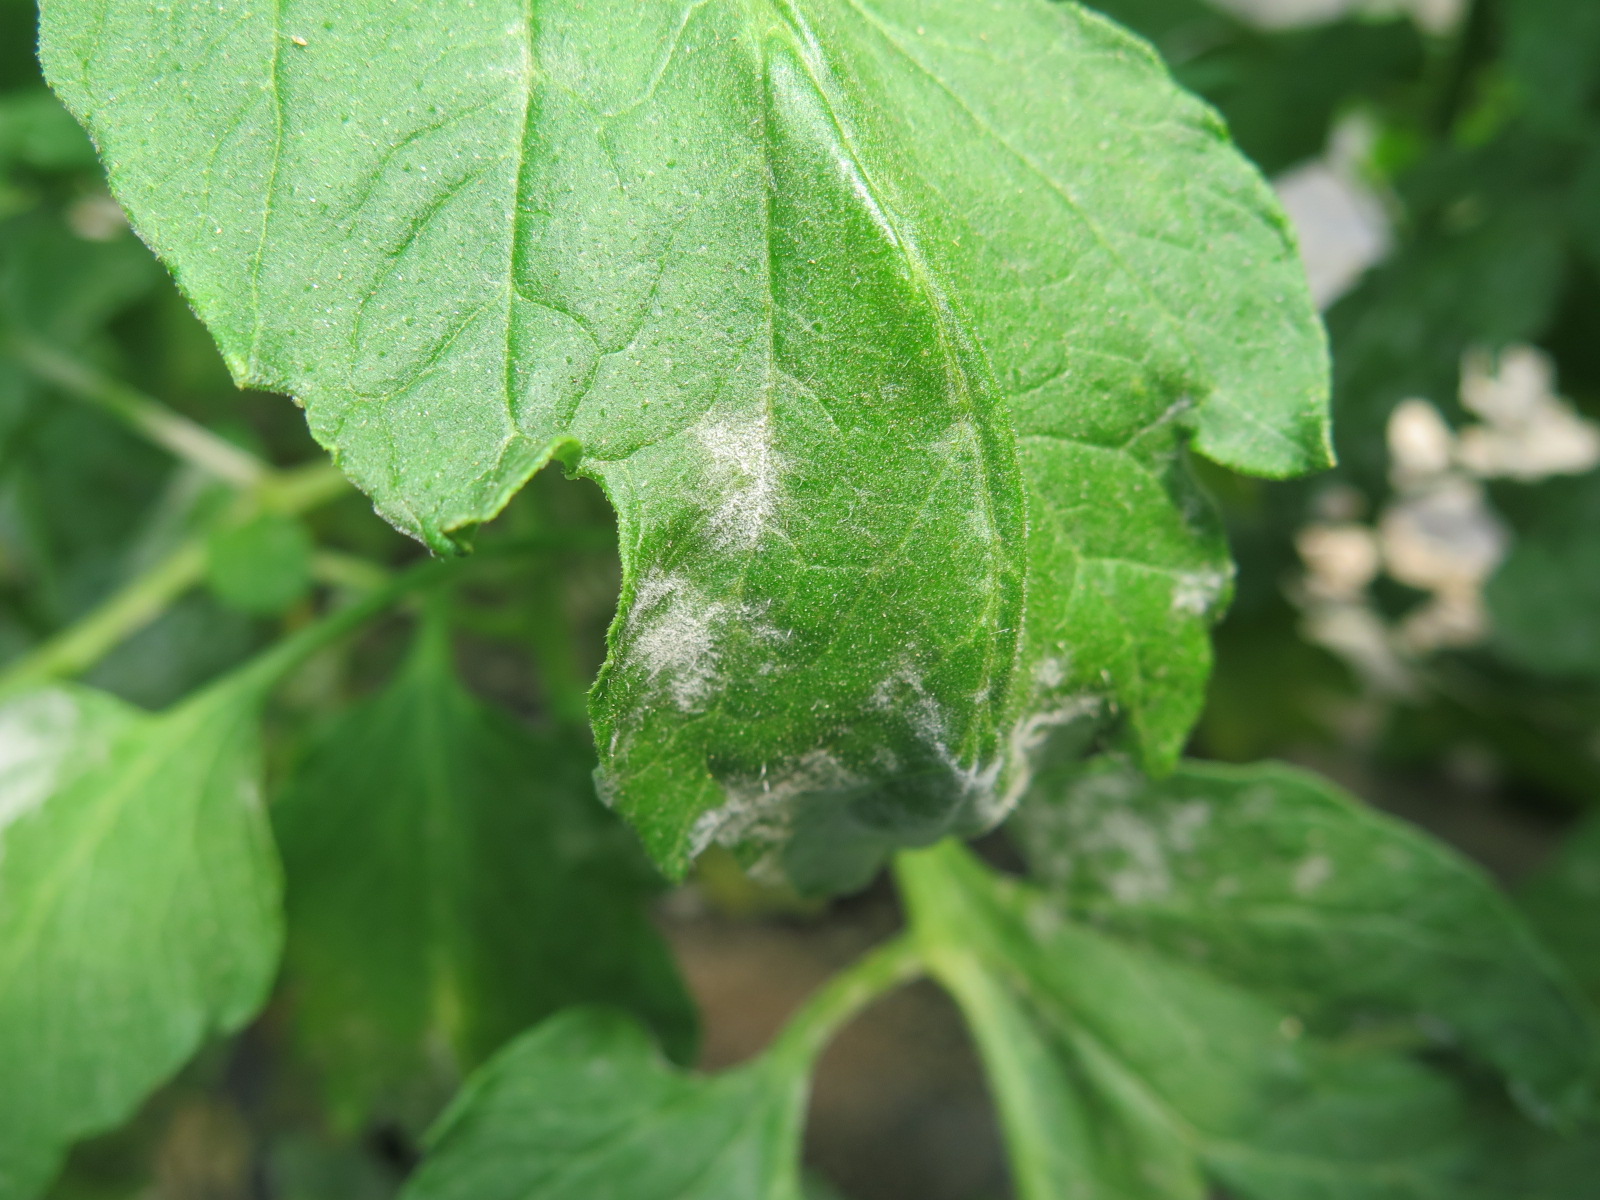 Figure 5. A close up of powdery mildew on tomato leaves.